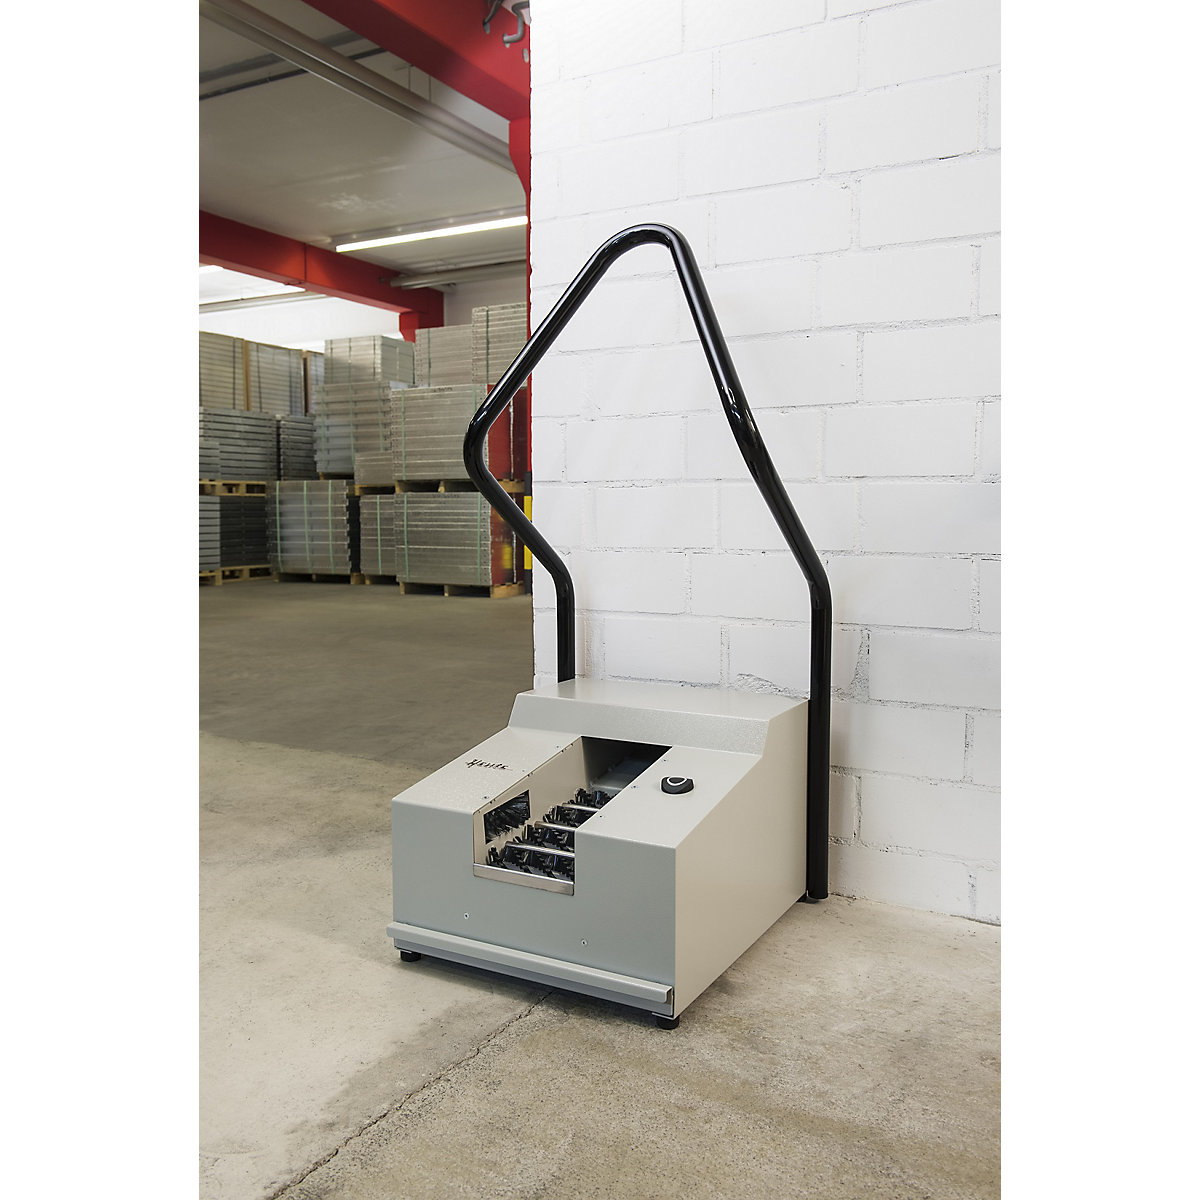 SOLAMAT 90 dry sole cleaning machine - Heute